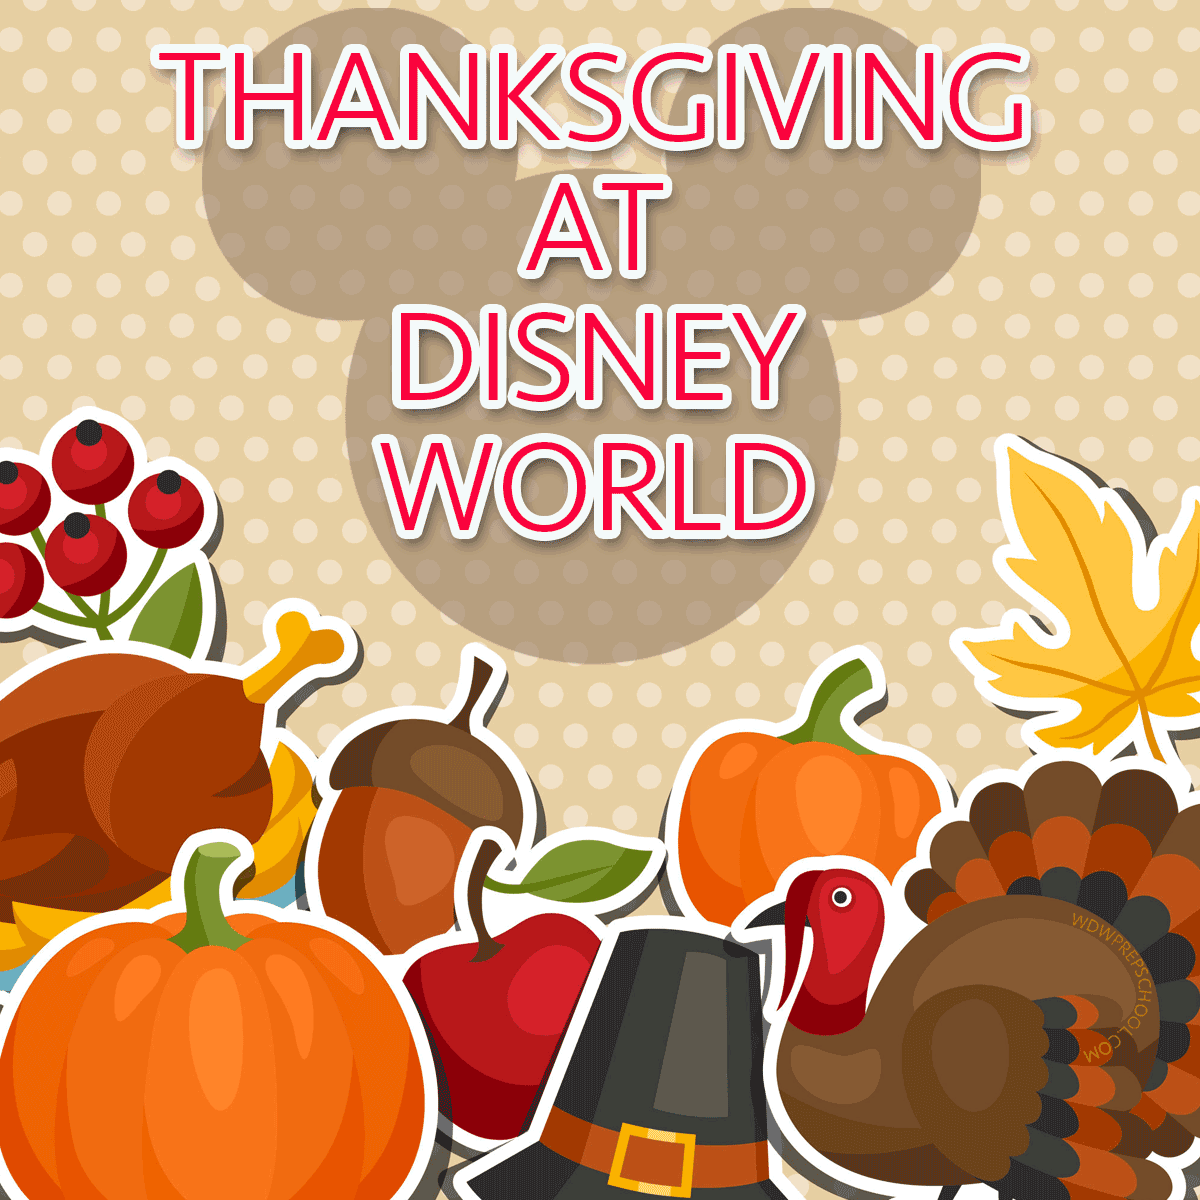 Tips for Thanksgiving at Disney World in 2017